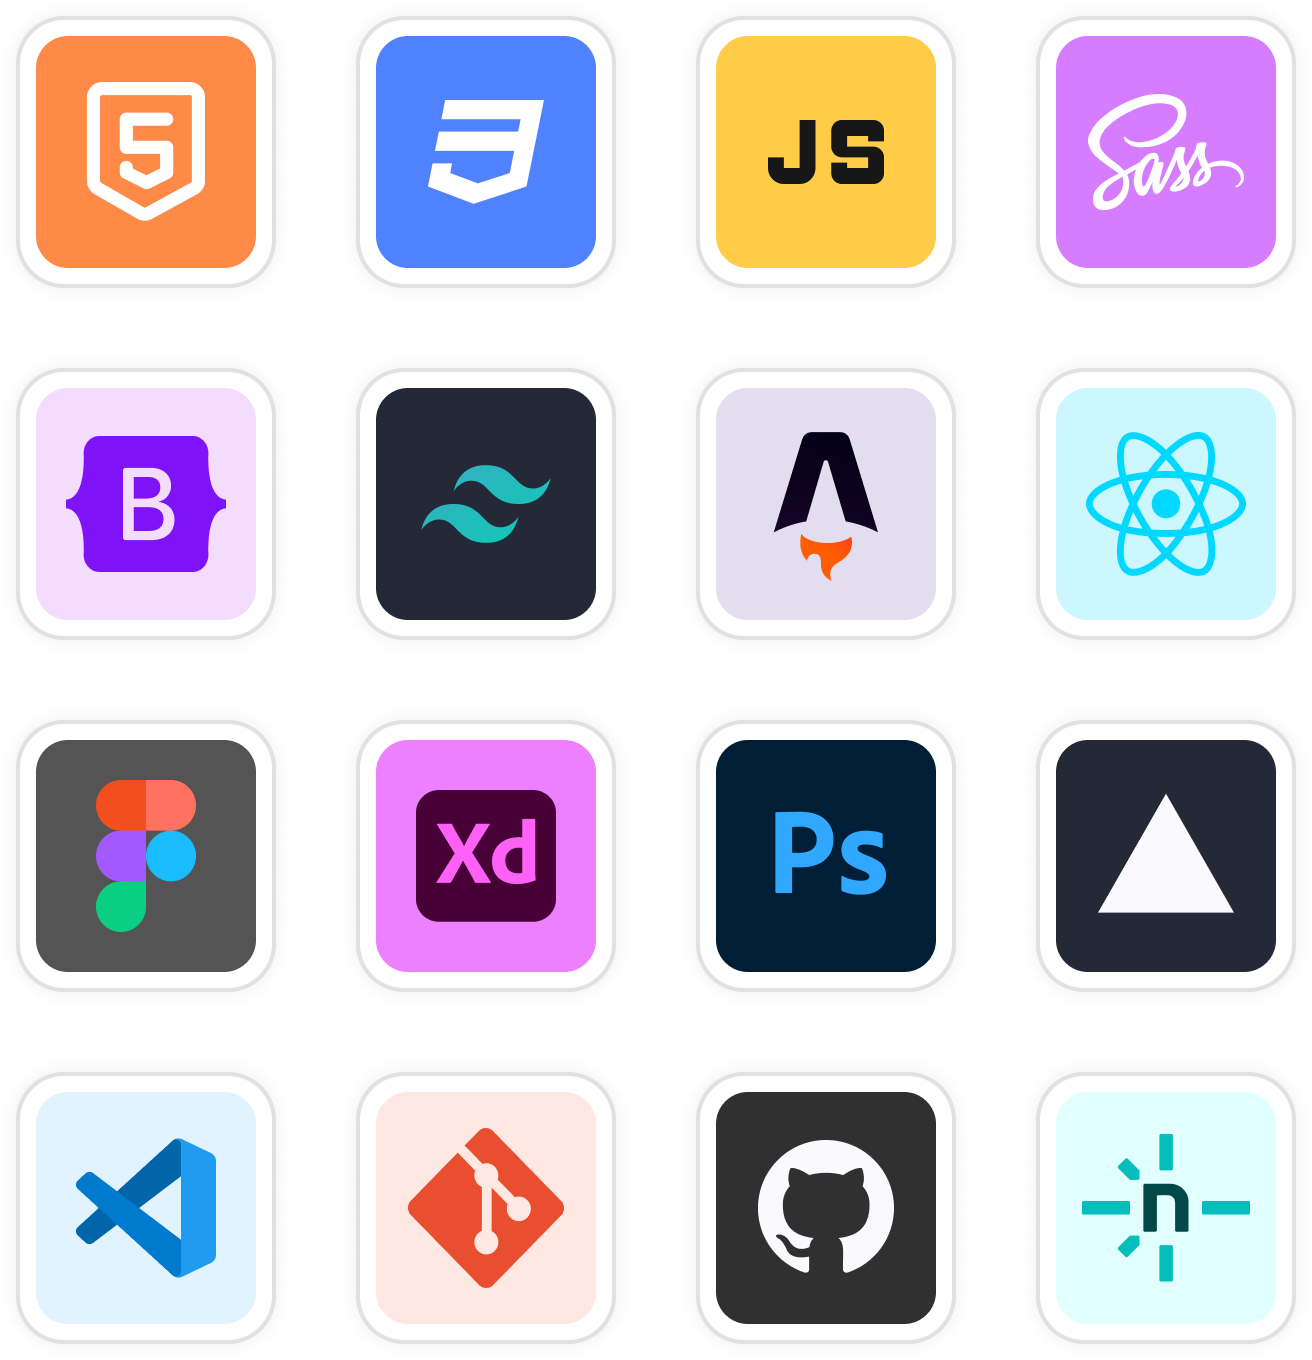 My tech stack